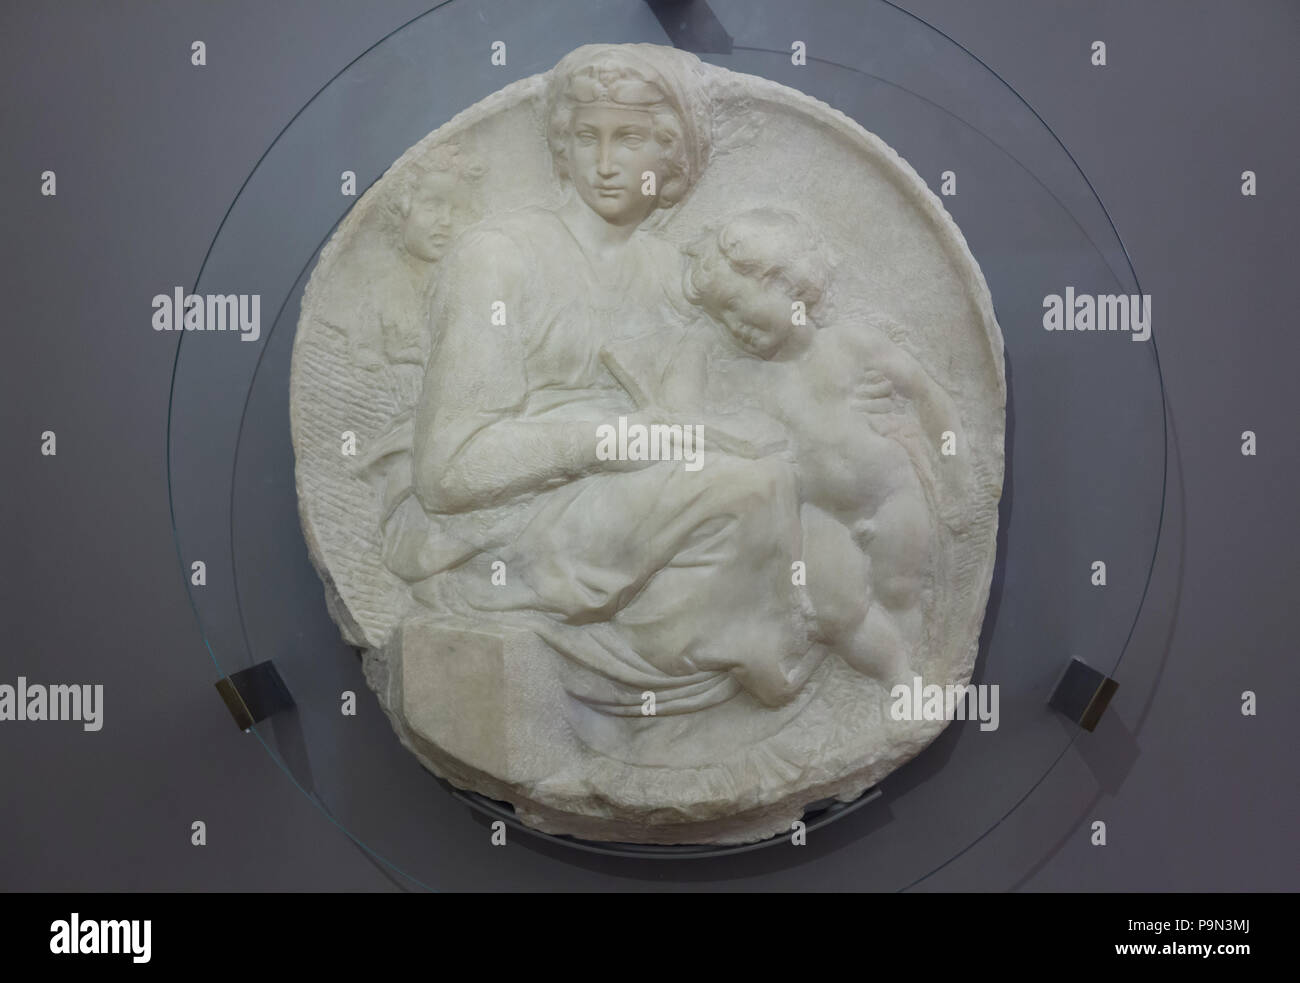 Marble relief of Madonna and Child with Young Saint John the Baptist, known as the Pitti Tondo by Italian Renaissance sculptor Michelangelo Buonarroti (ca. 1505) on display in the Bargello Museum (Museo Nazionale del Bargello) in Florence, Tuscany, Italy. Stock Photo